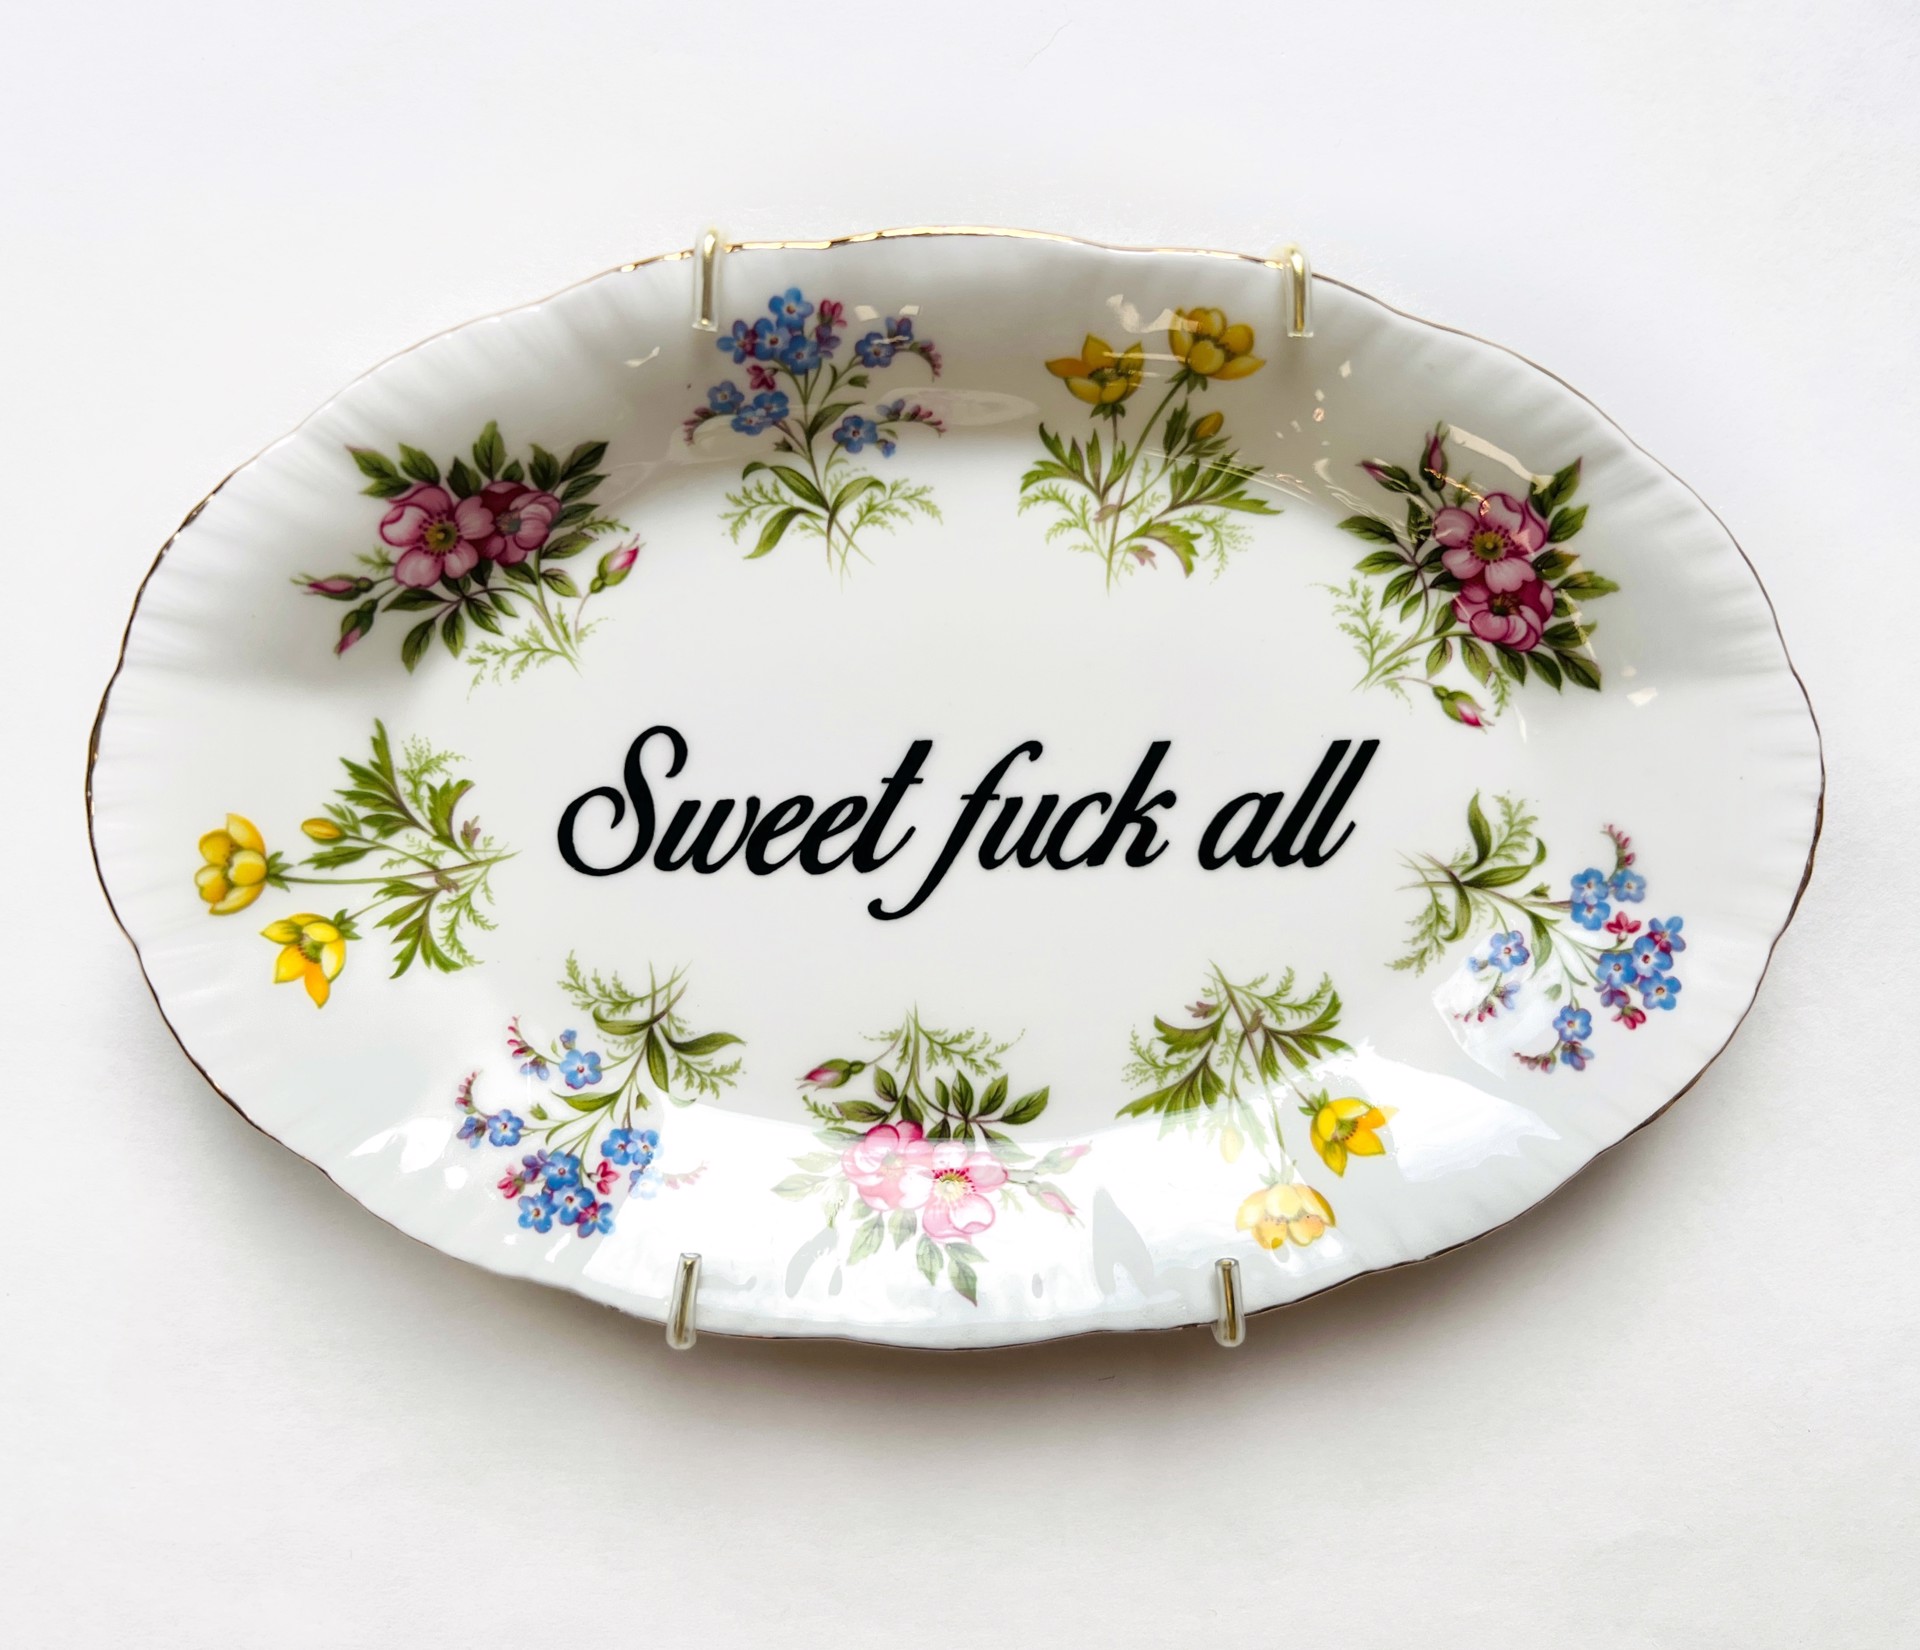 Sweet fuck all (dessert plate) by Marie-Claude Marquis